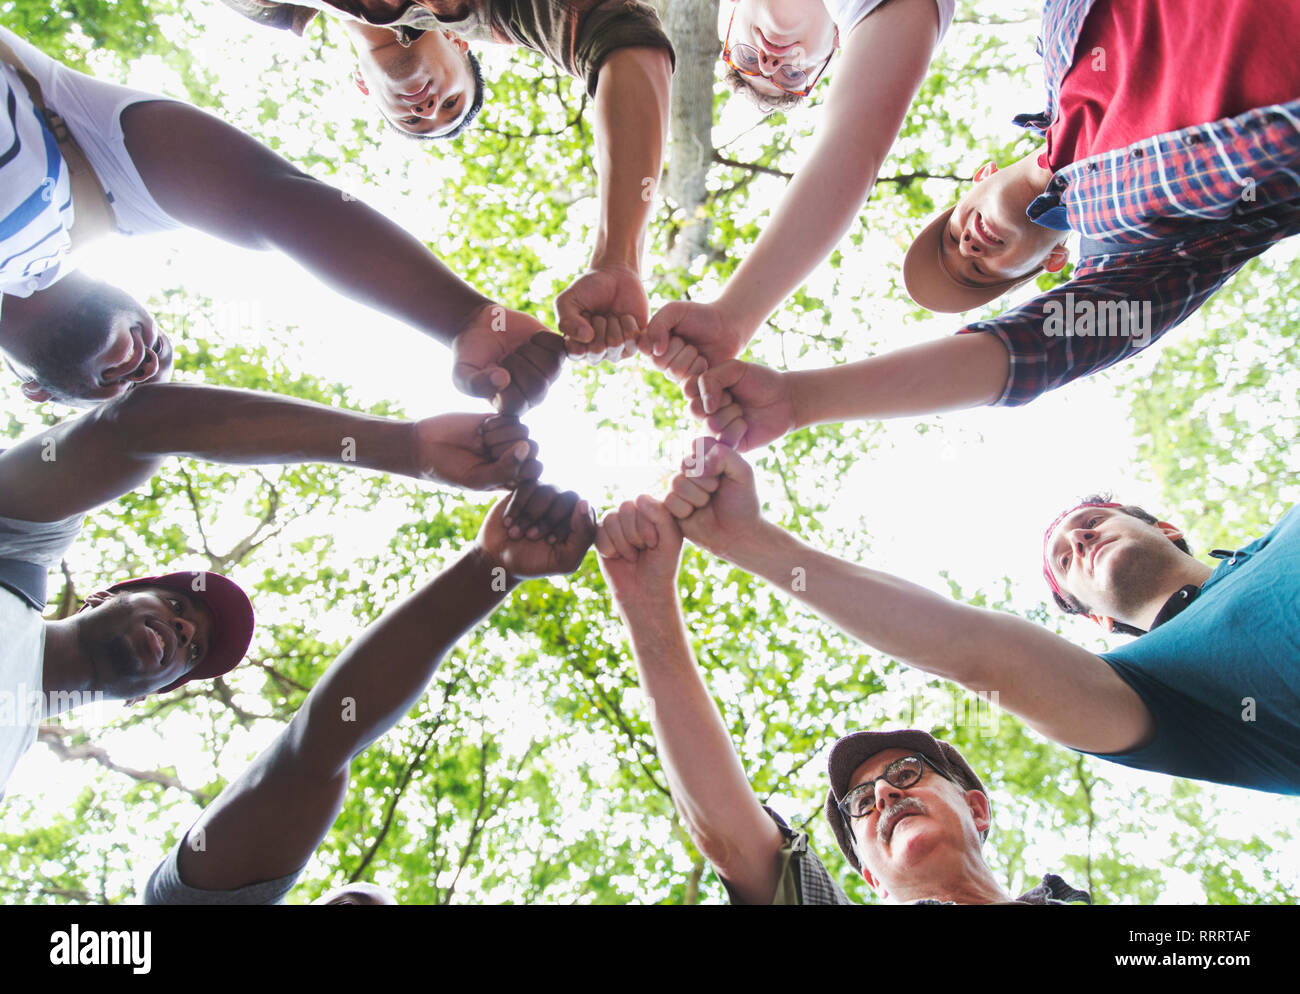 View from below mens group joining fists in circle, hiking under trees Stock Photo